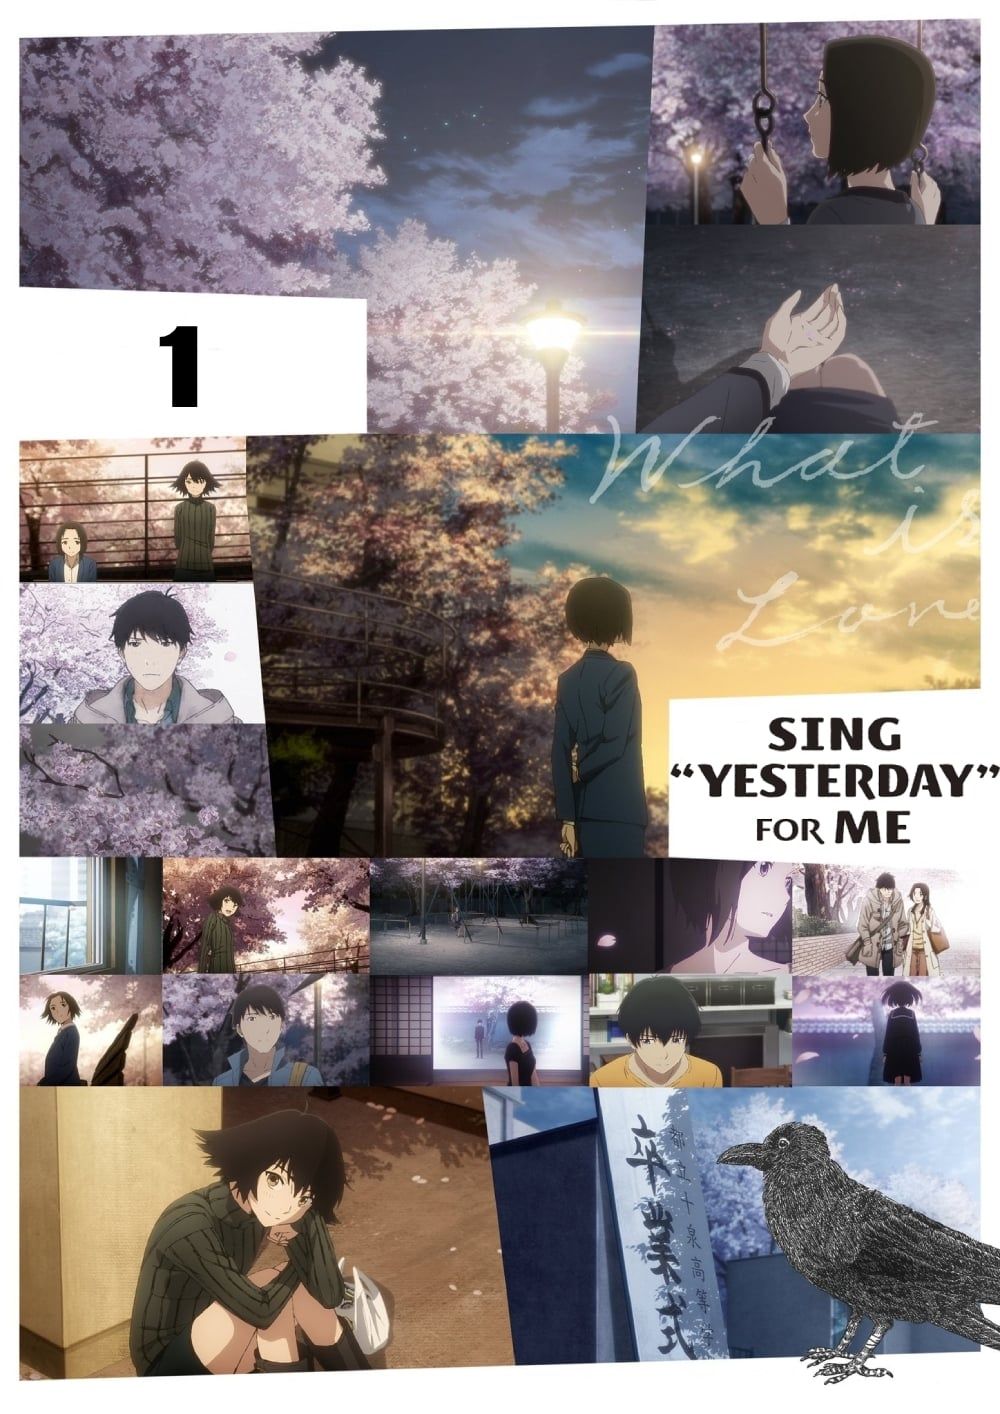 Watch SING YESTERDAY FOR ME season 1 episode 2 streaming online